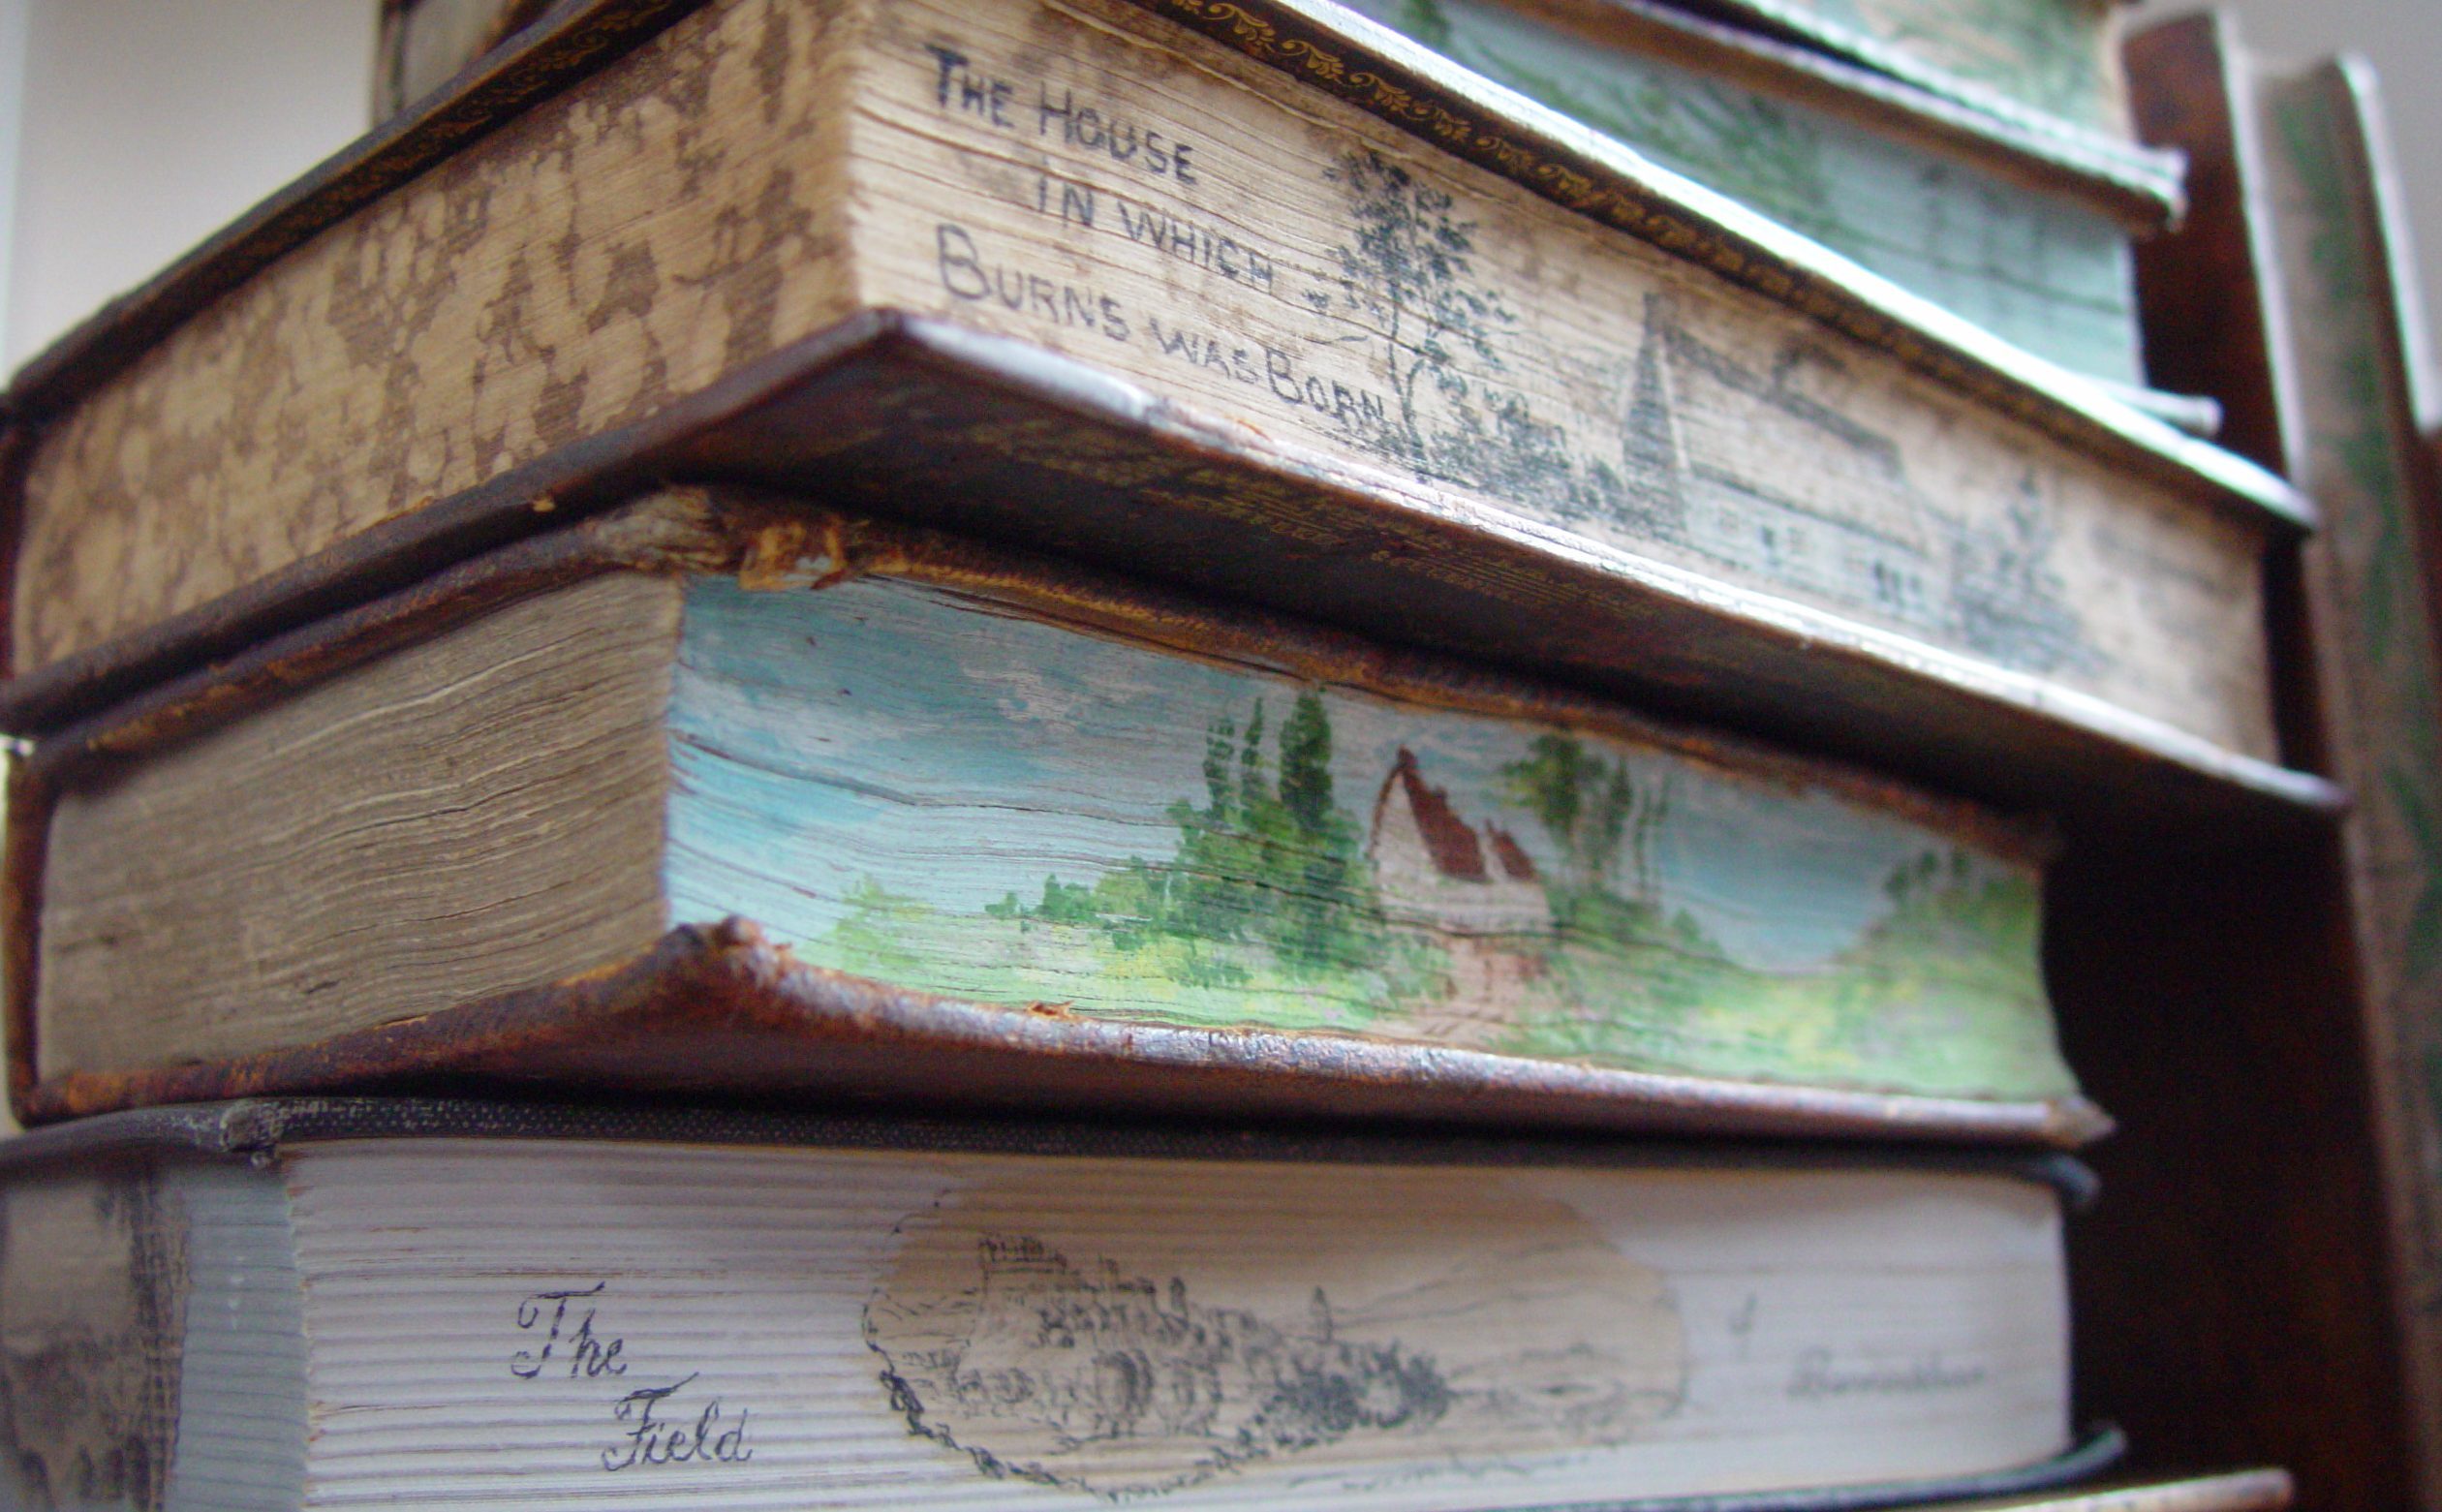 Painted edge pages of a book in the Murison Collection.